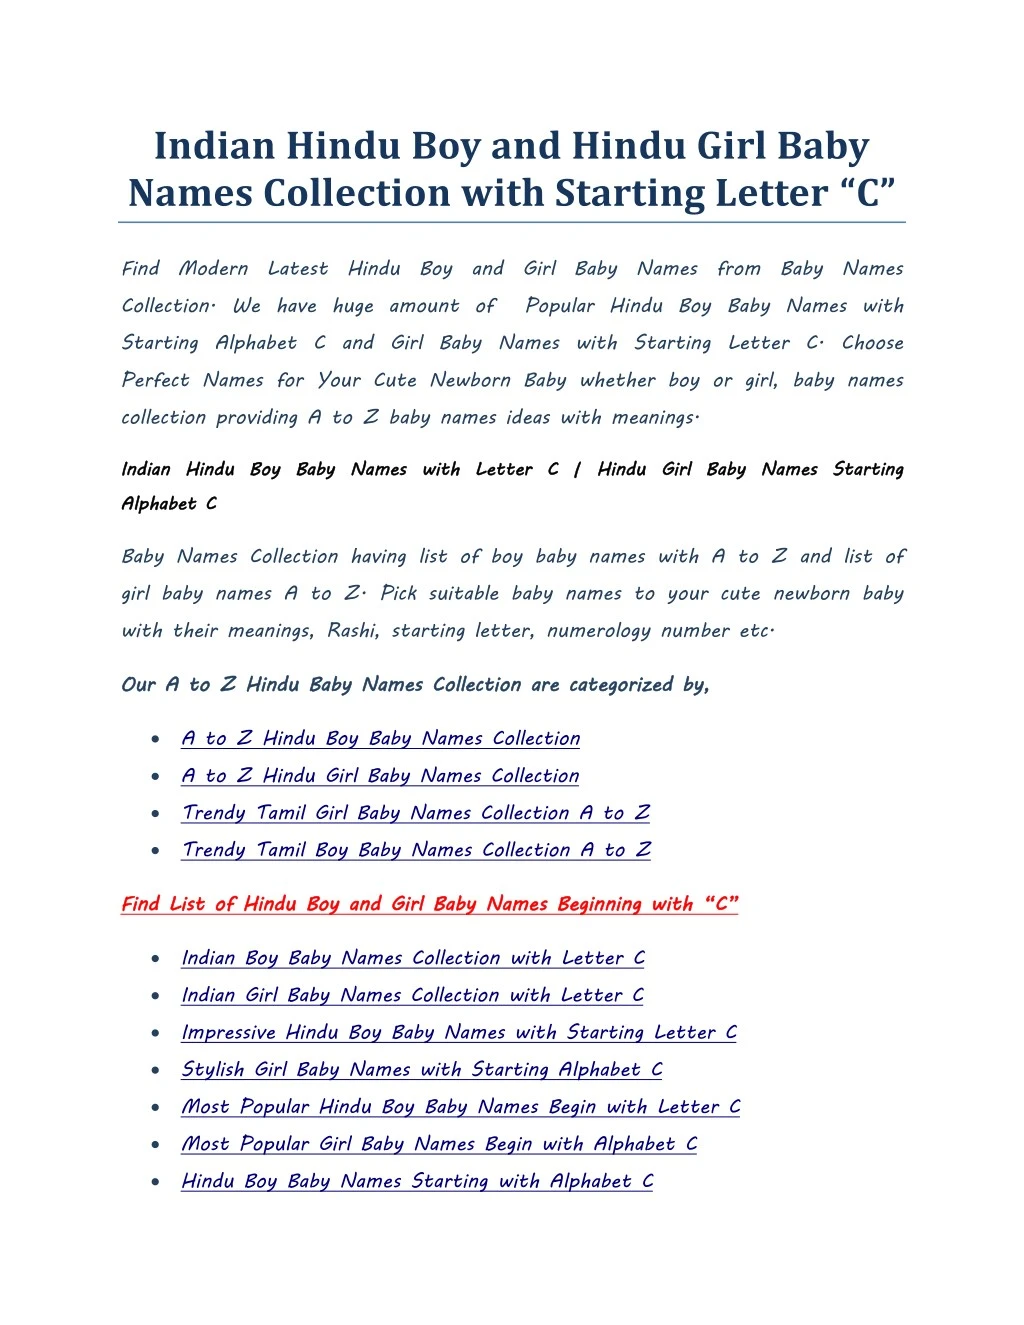 Ppt Indian Hindu Boy Baby Names With Letter C Hindu Girl Baby